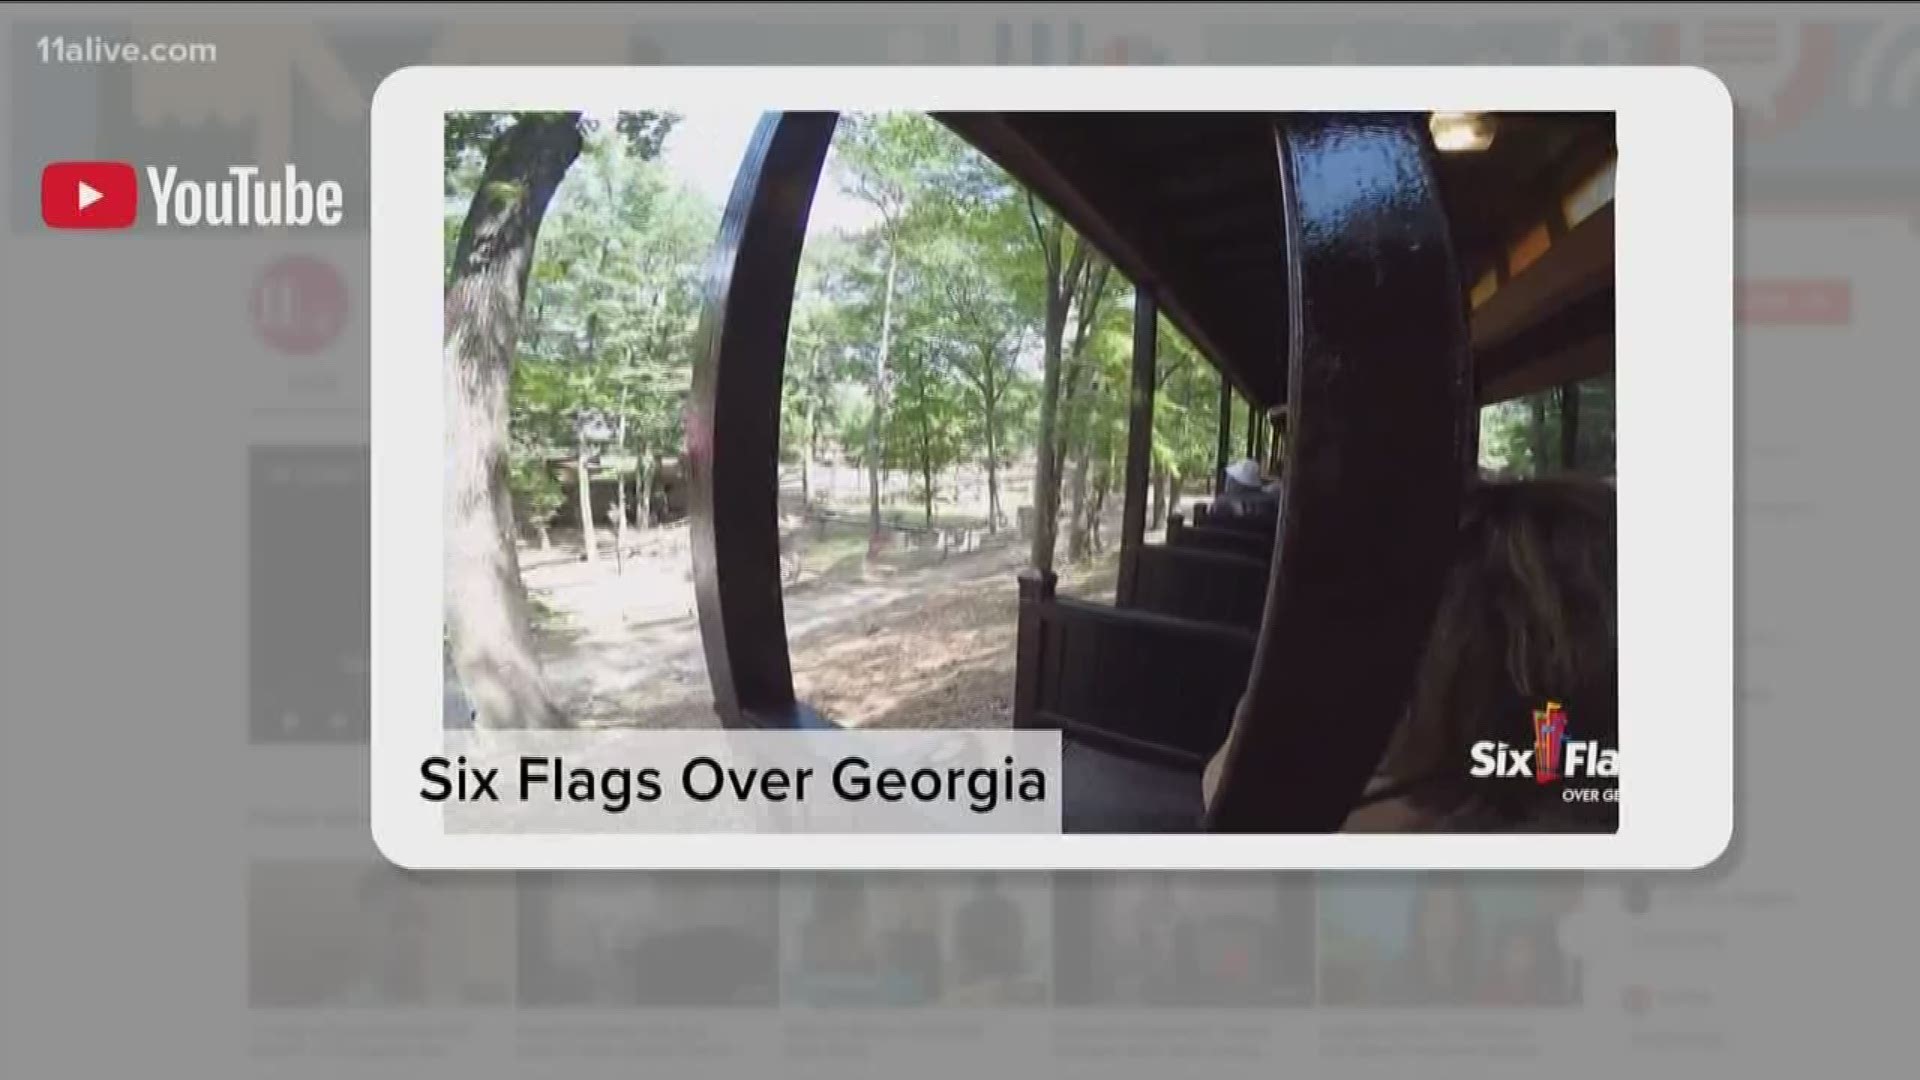 Weekend visitors to Six Flags seeking thrills may have found one that was entirely unintentional when a train derailed at the Atlanta-area amusement park.